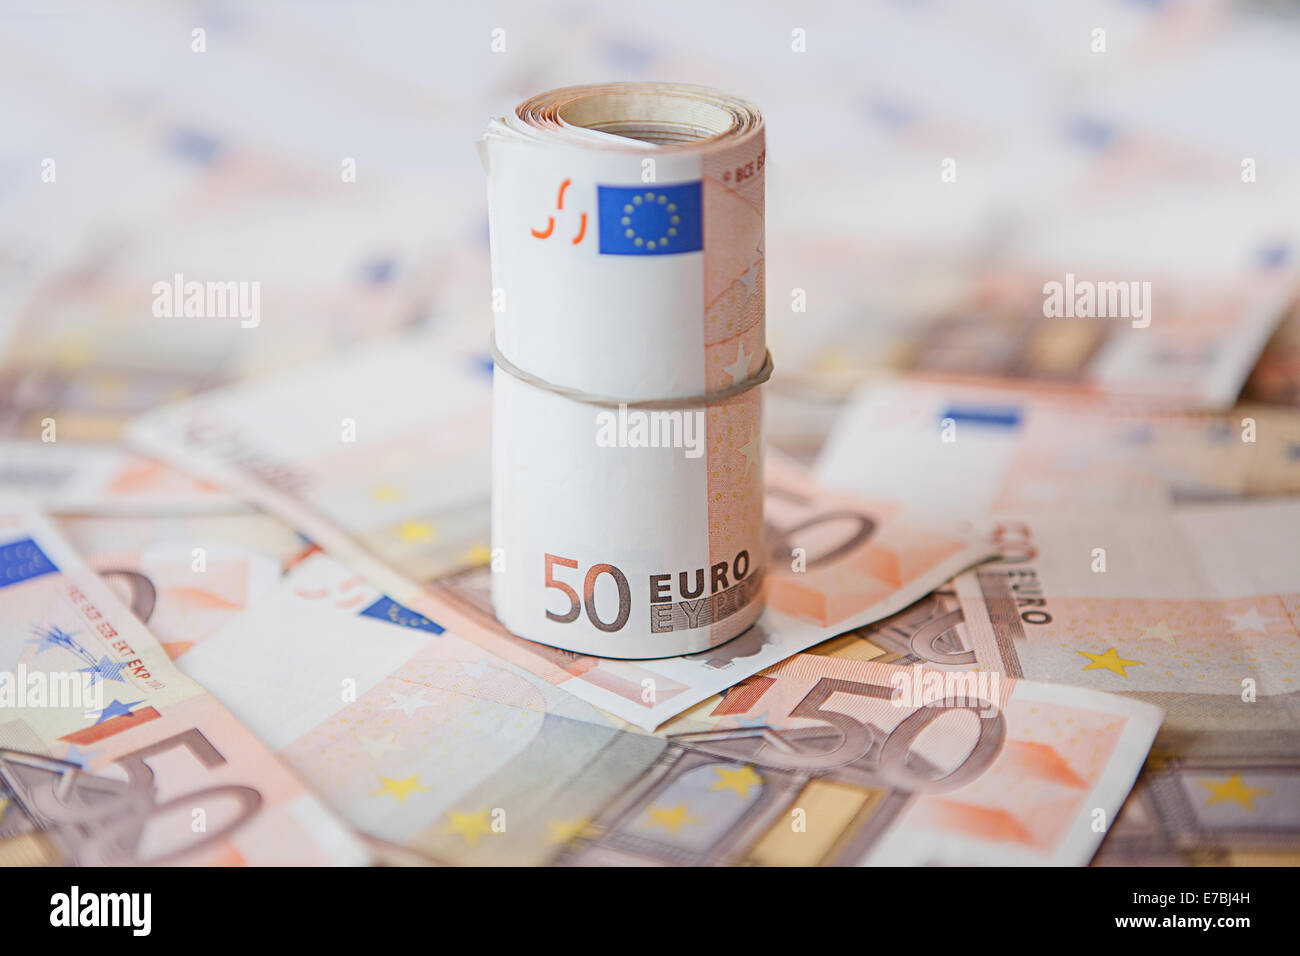 Euro currency, money in roll, cash in fifties Stock Photo